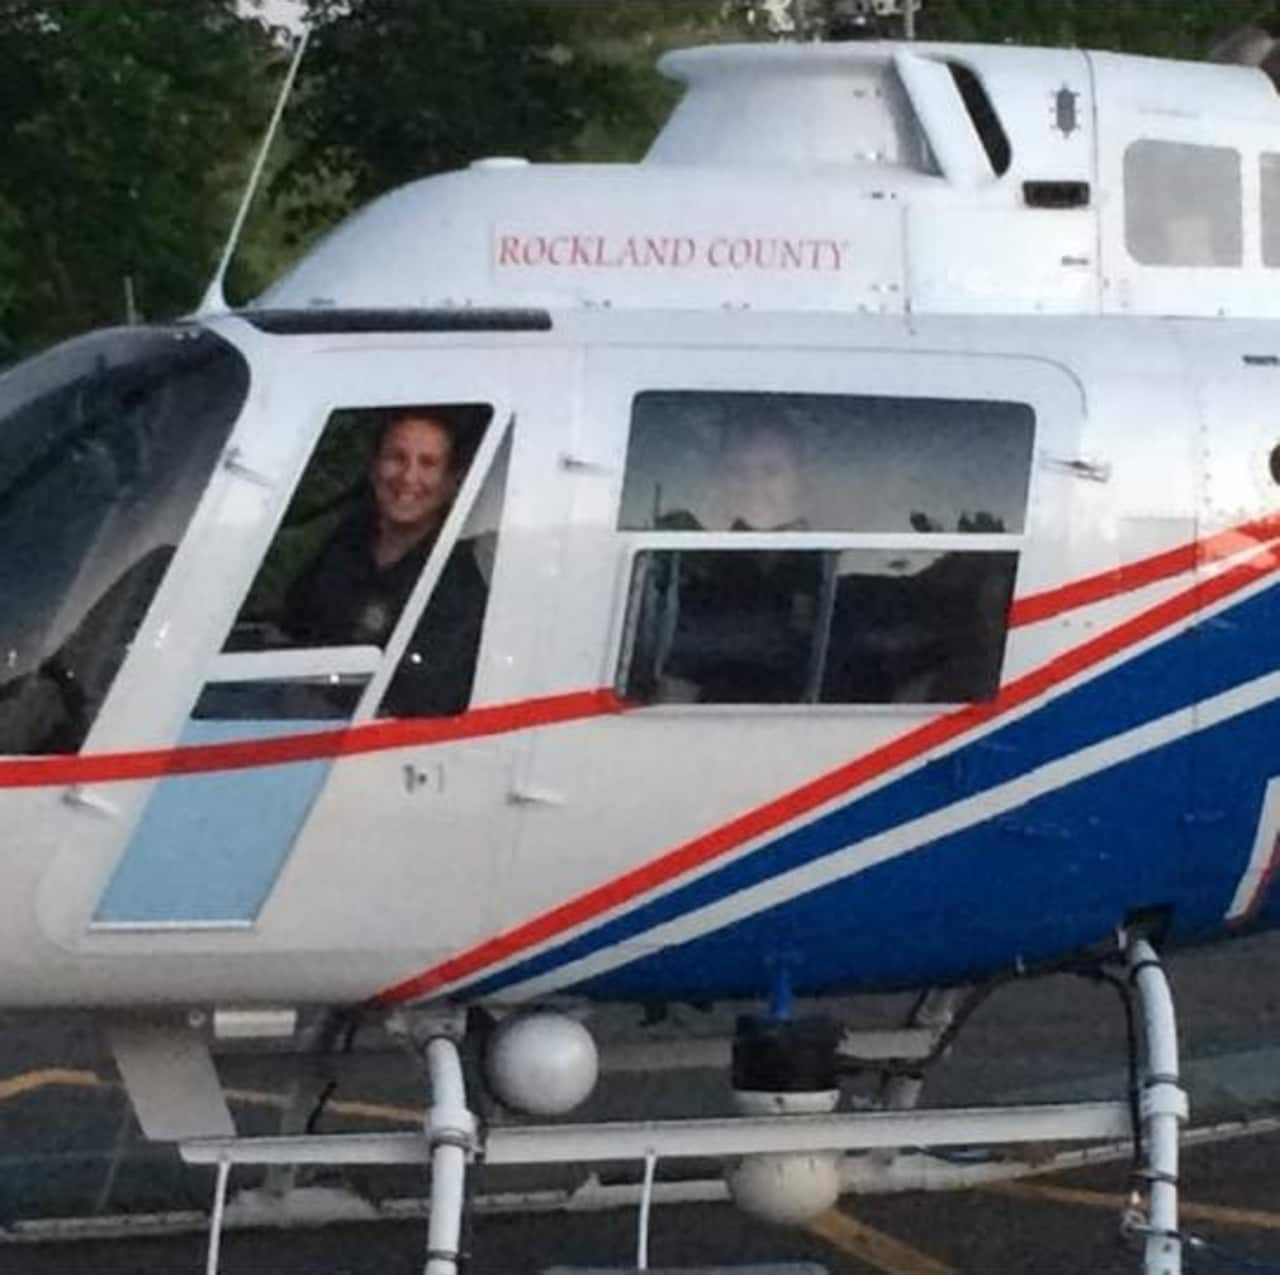 The Ramapo Police Department's student interns learned firsthand about Rockland County's Emergency Services helicopter.